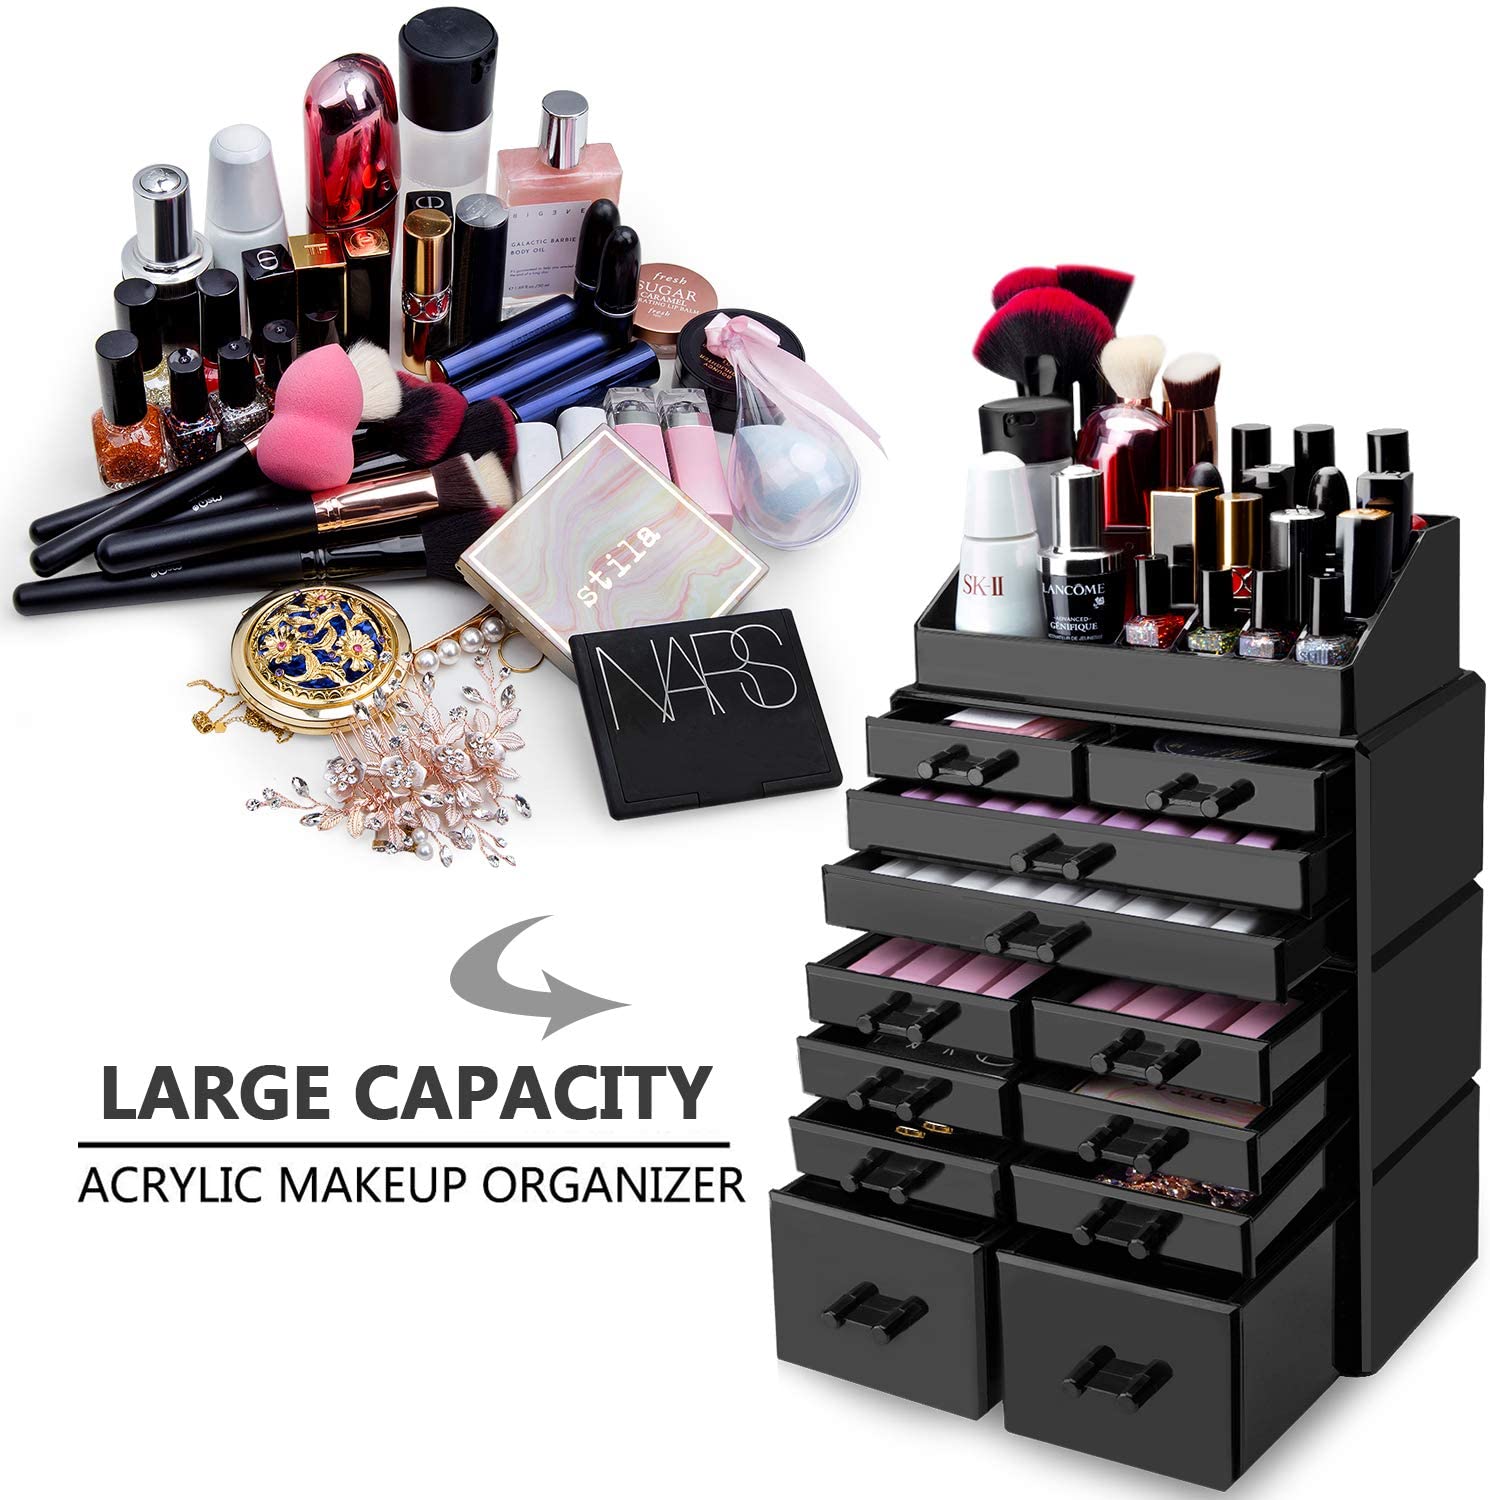 HBlife Makeup Organizer Acrylic Cosmetic Storage Drawers and Jewelry Display Box with 12 Drawers, 9.5" x 5.4" x 15.8", Black